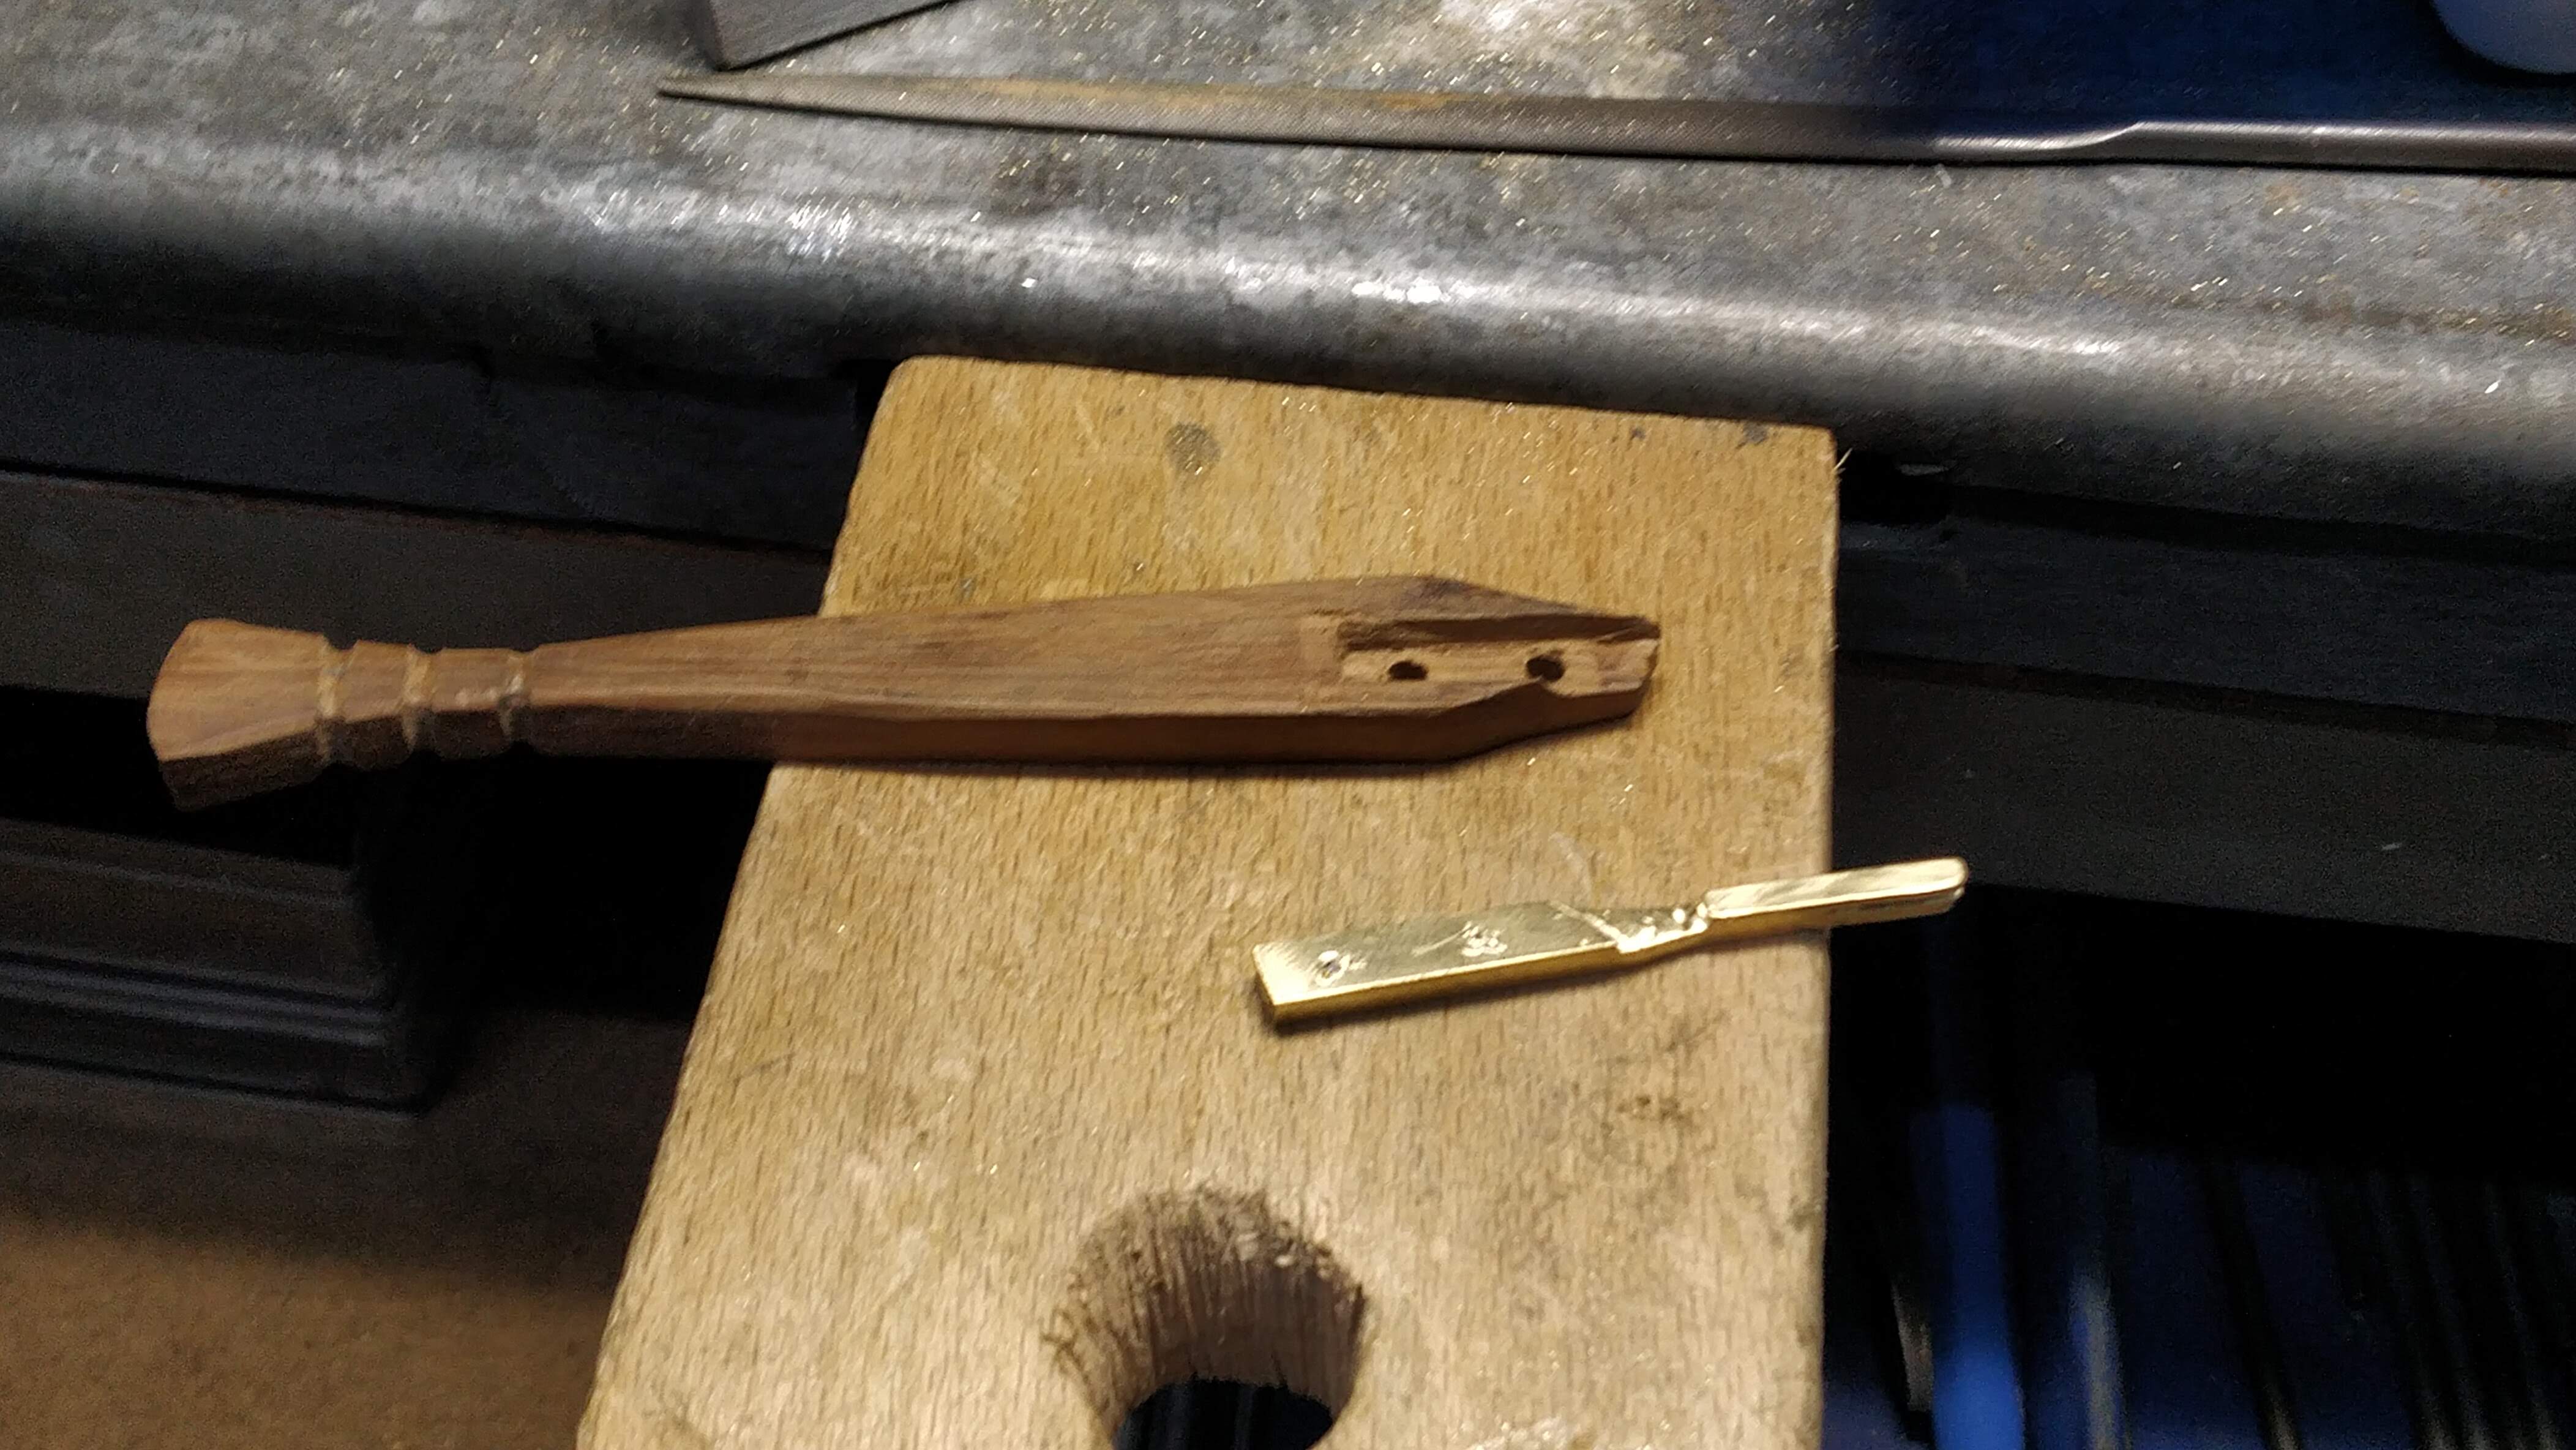 Remaking the tip with brass